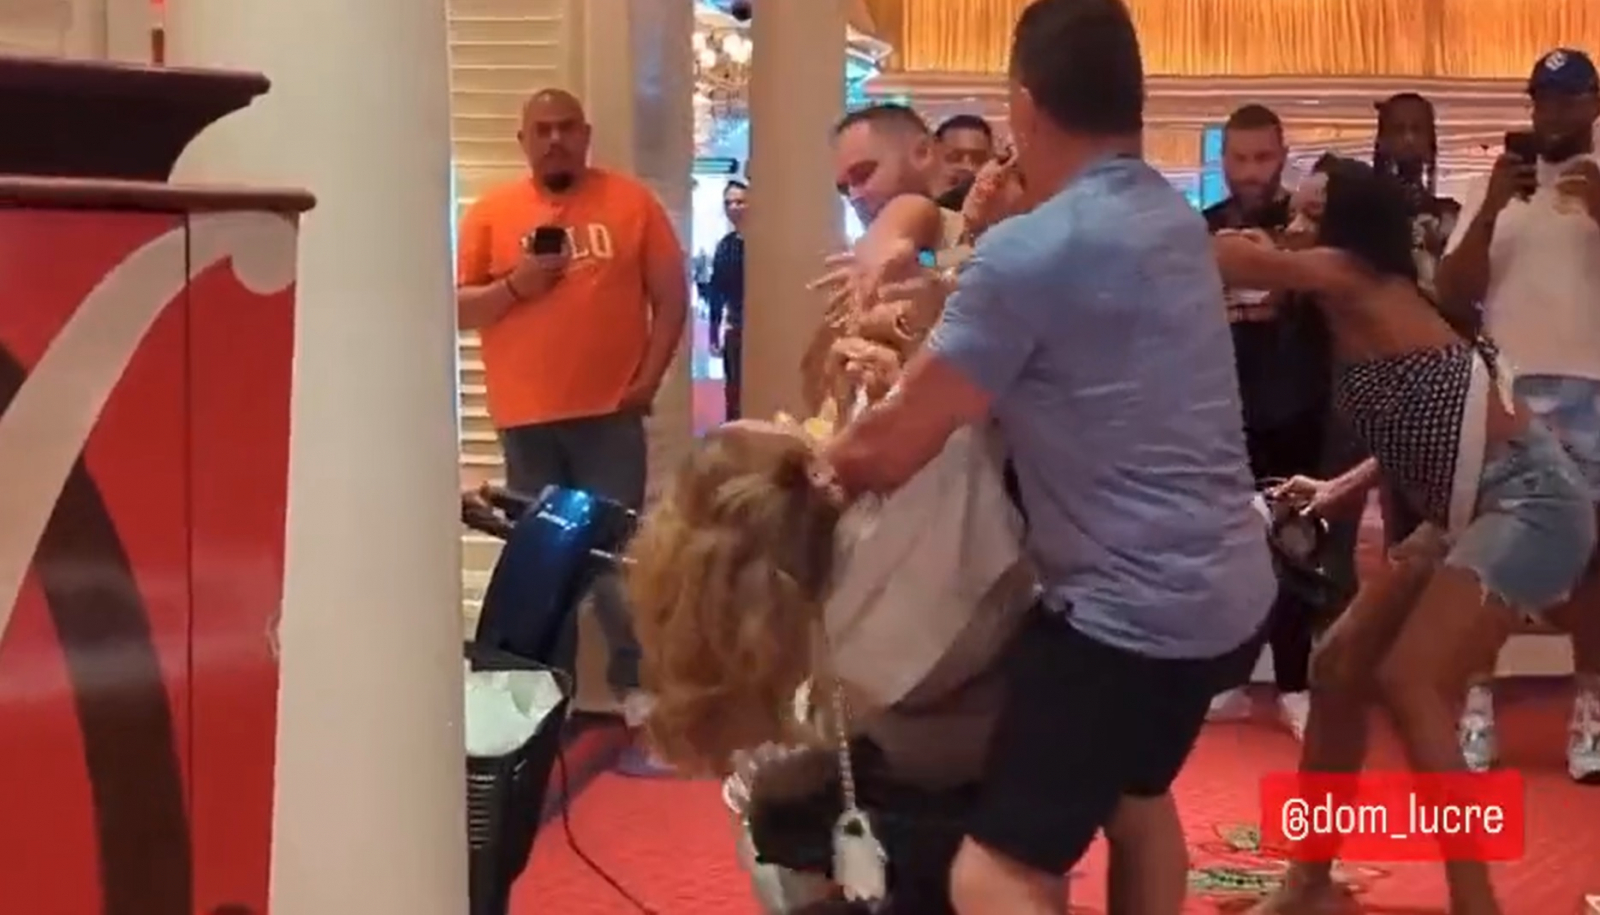 Shocking Video Captures Four Scantily Clad Women Brawling at Luxurious